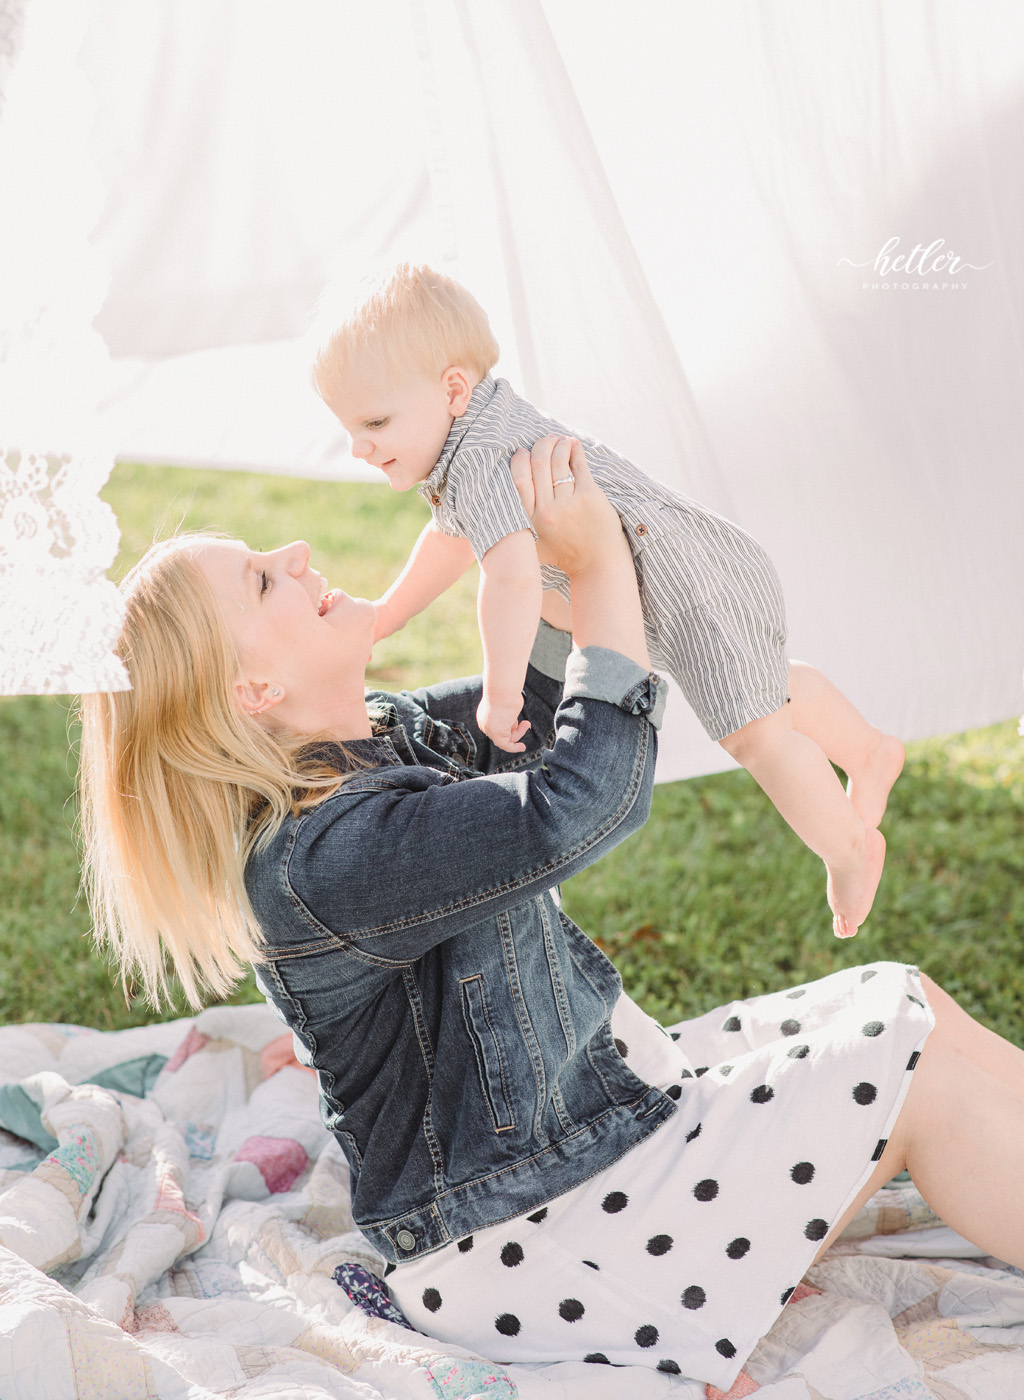 Sparta Michigan summer mini sessions in a backyard with a garden and clothesline theme